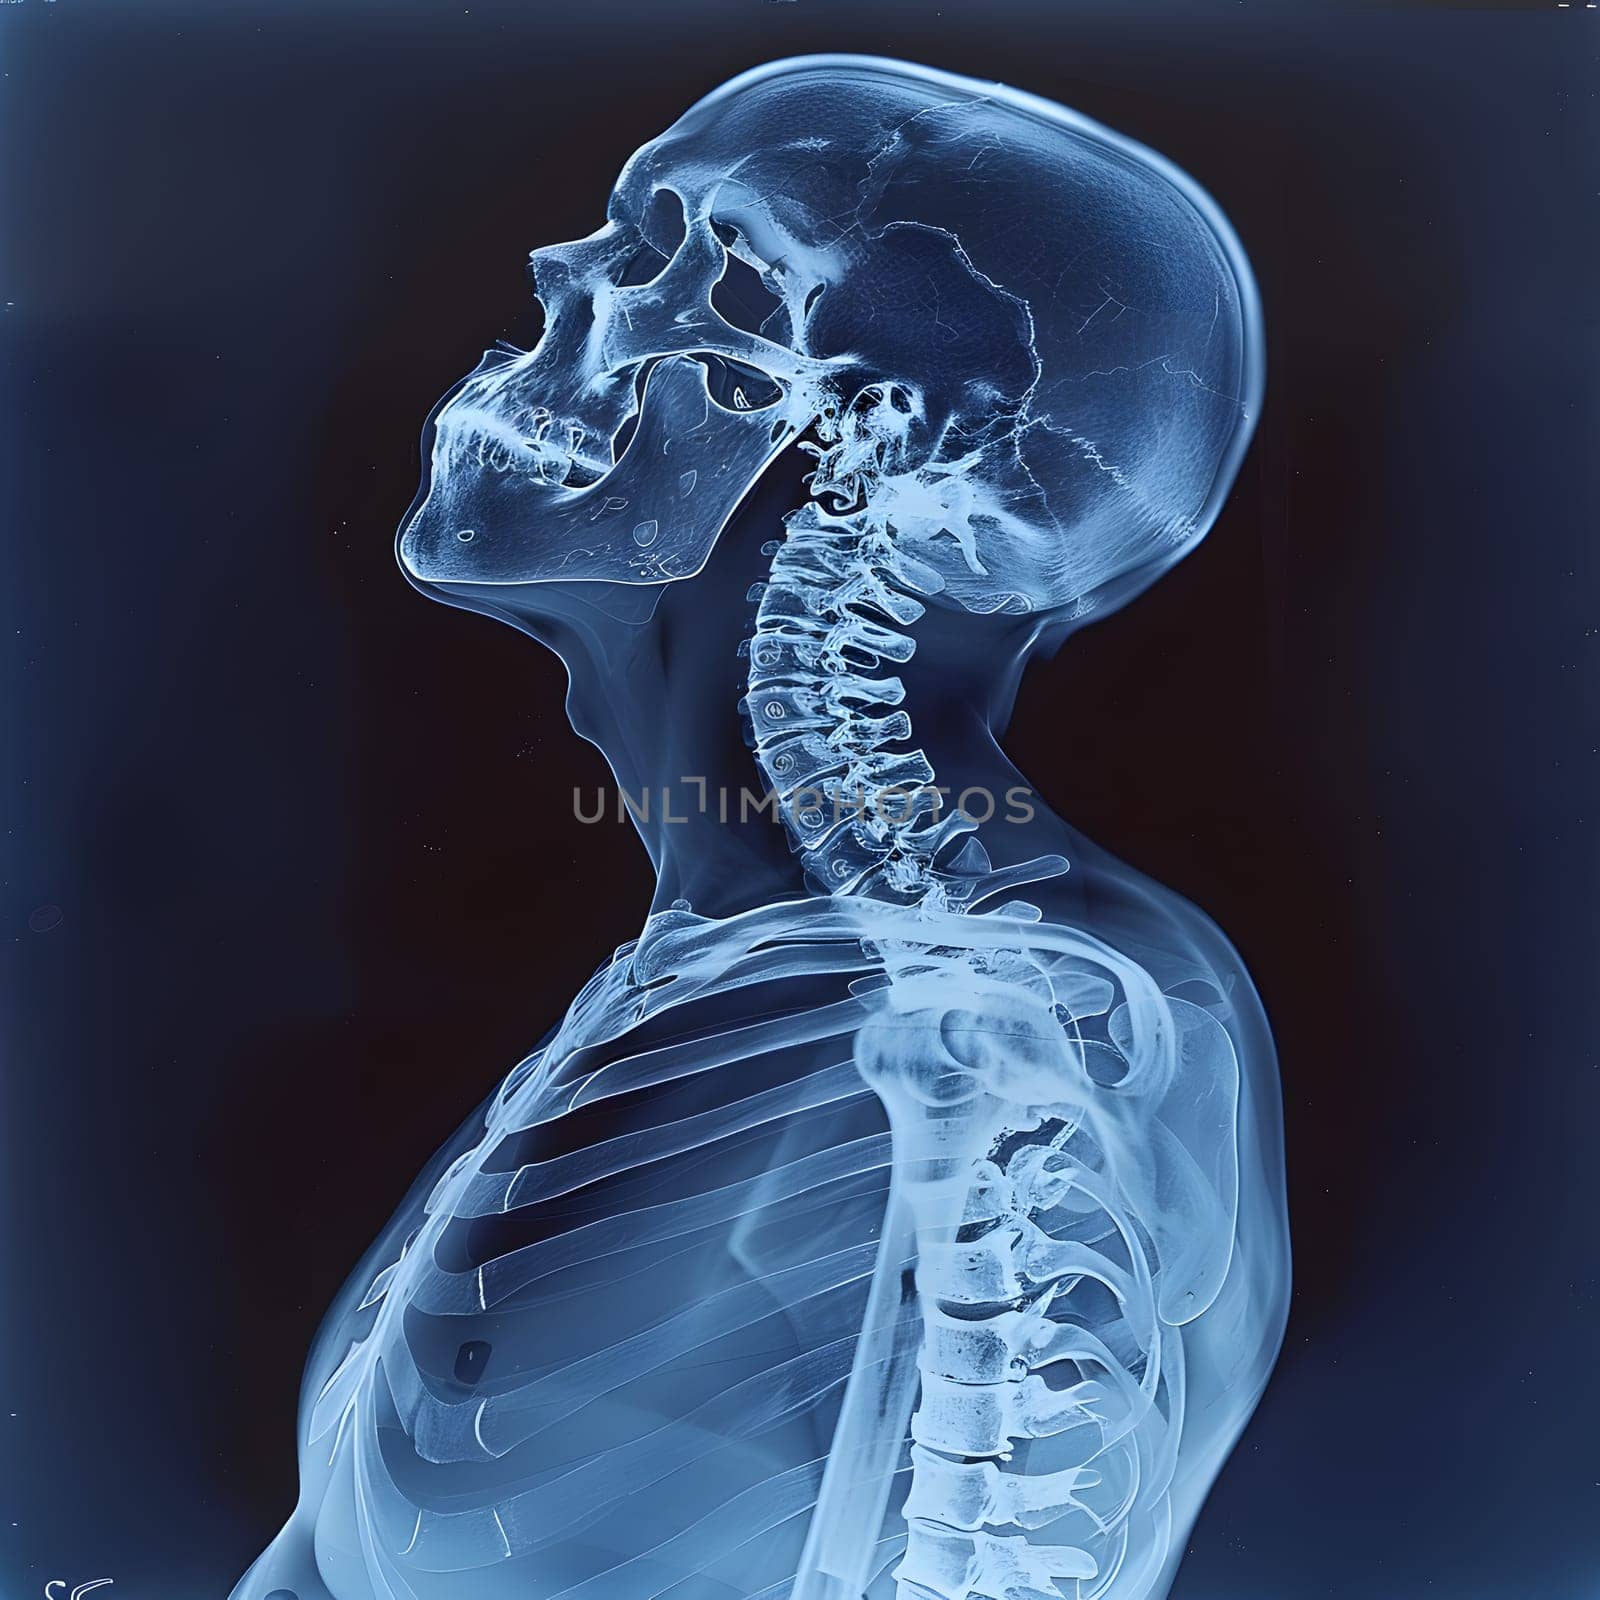 A medical imaging service provided an electric blue xray of a human bodys skull and spine, showcasing the intricate bone structure and transparent material of the neck and jaw in stunning detail